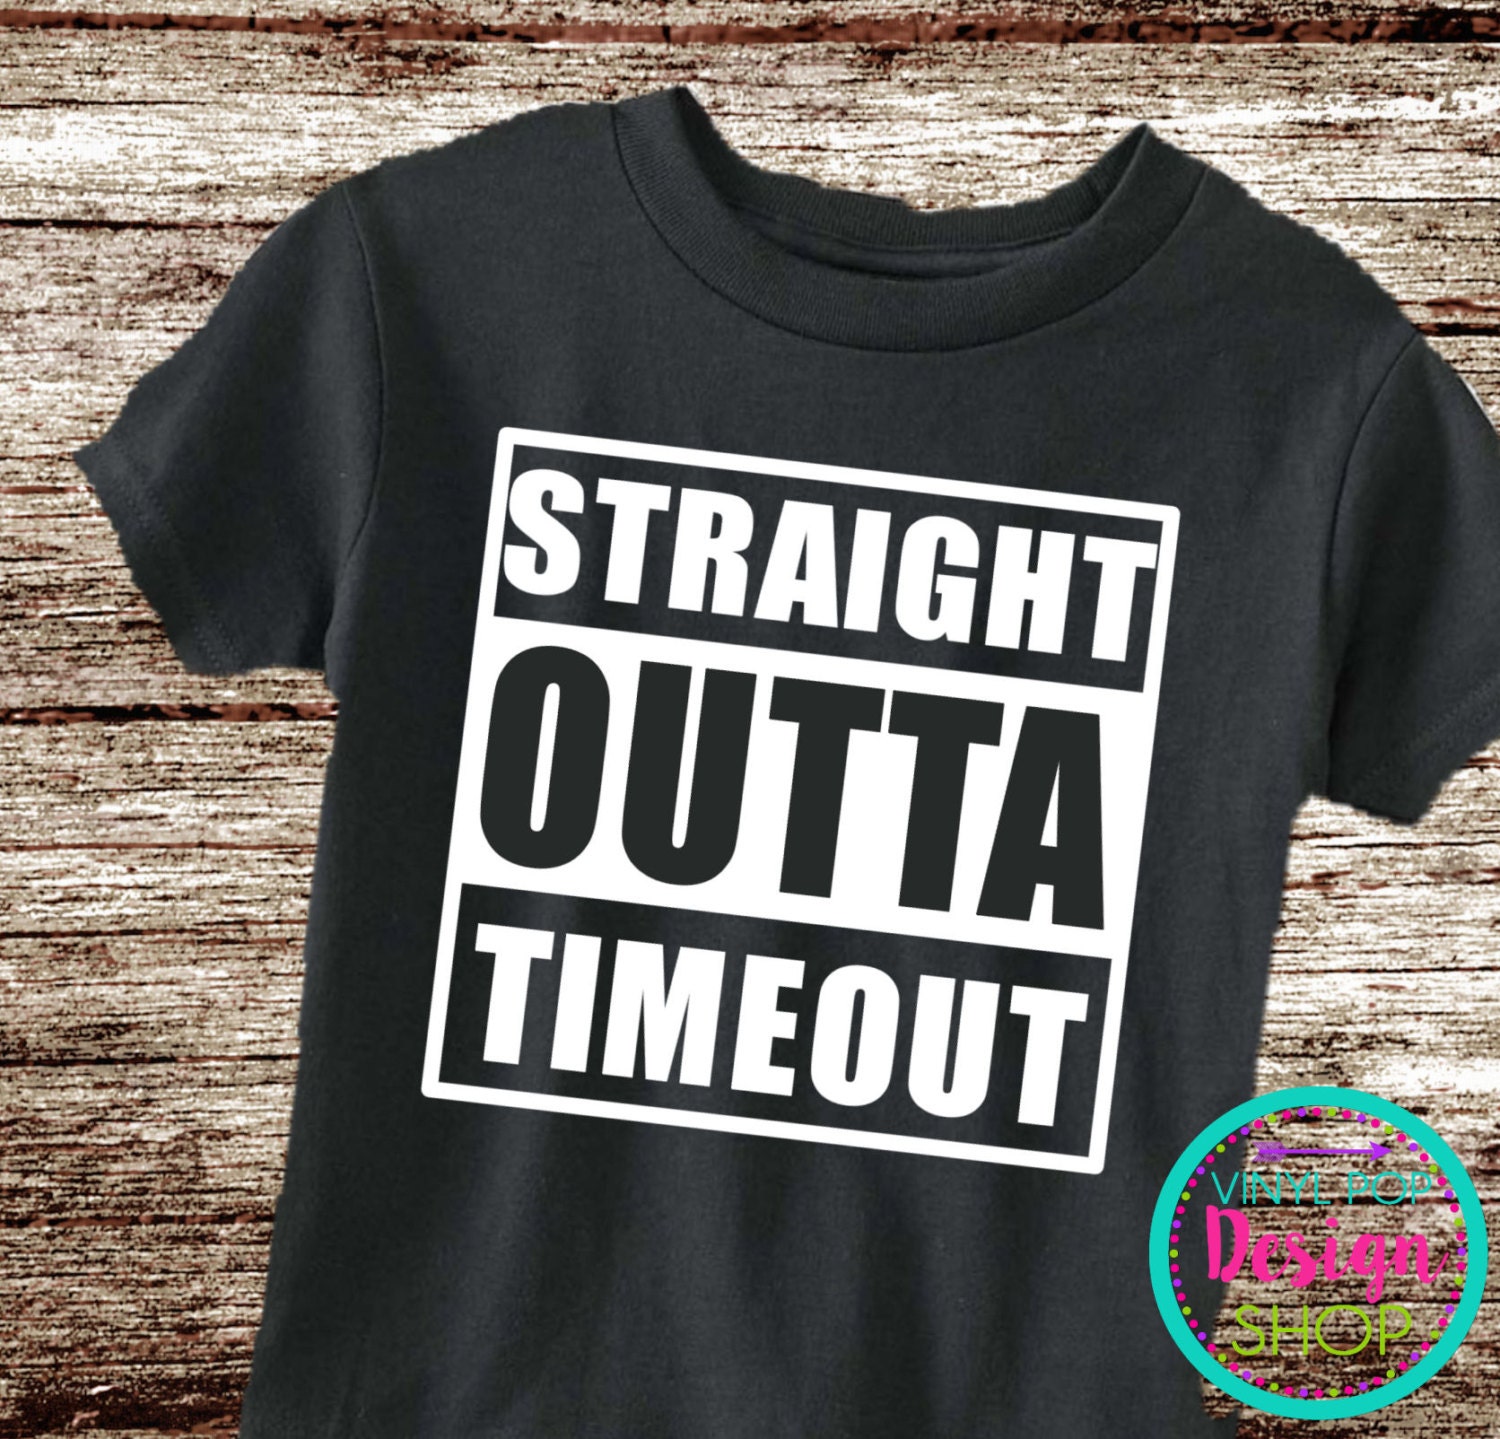 Straight outta timeout shirt toddler funny kid shirt funny